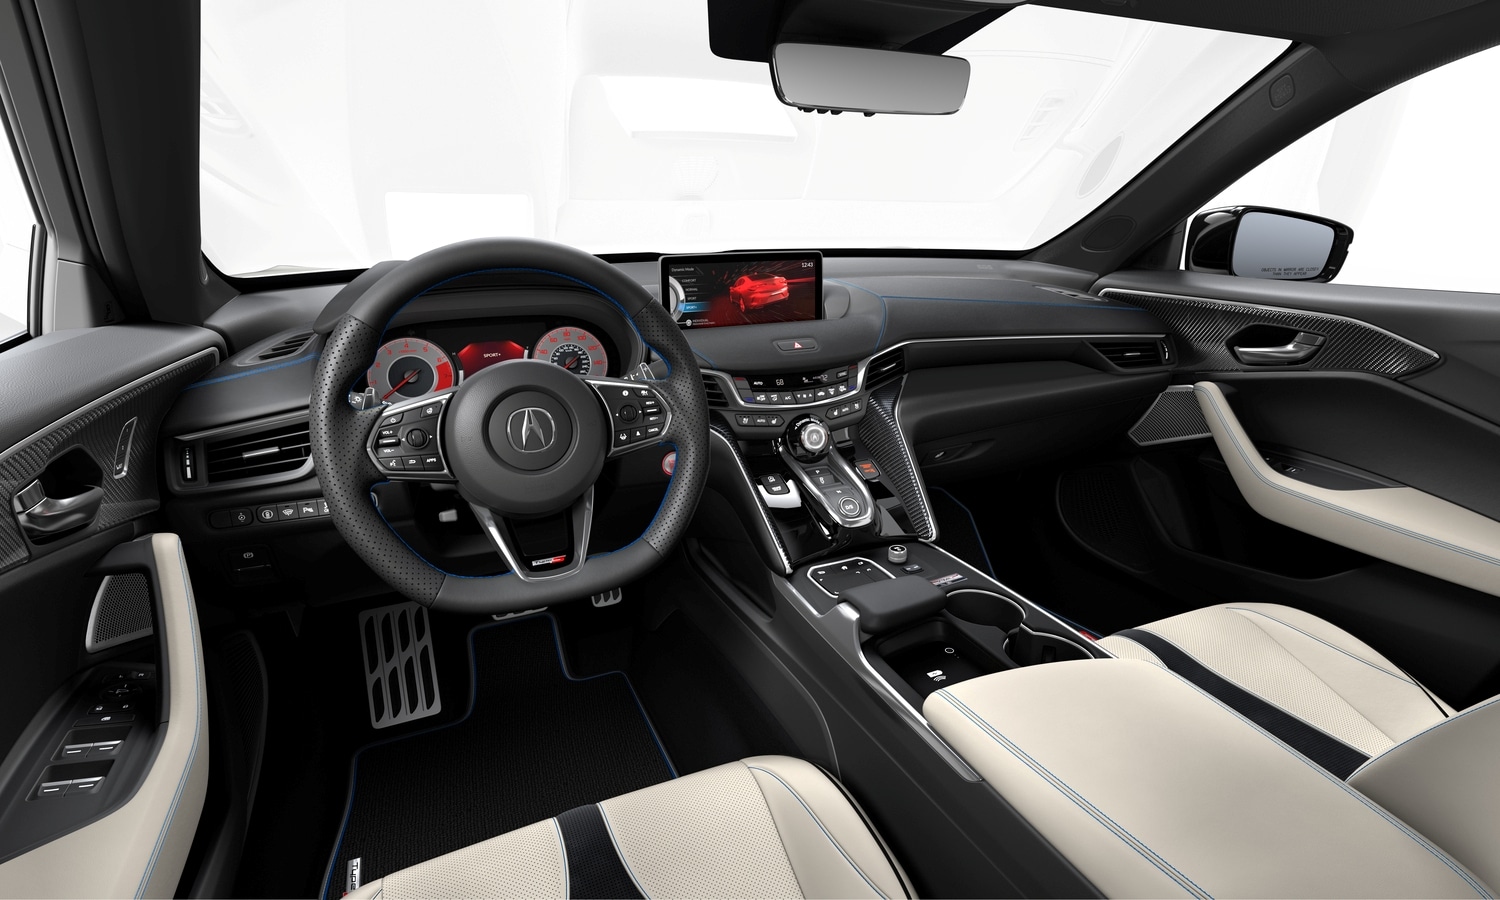 Acura TLX Type S PMC Edition - Acura TLX PMC Interior